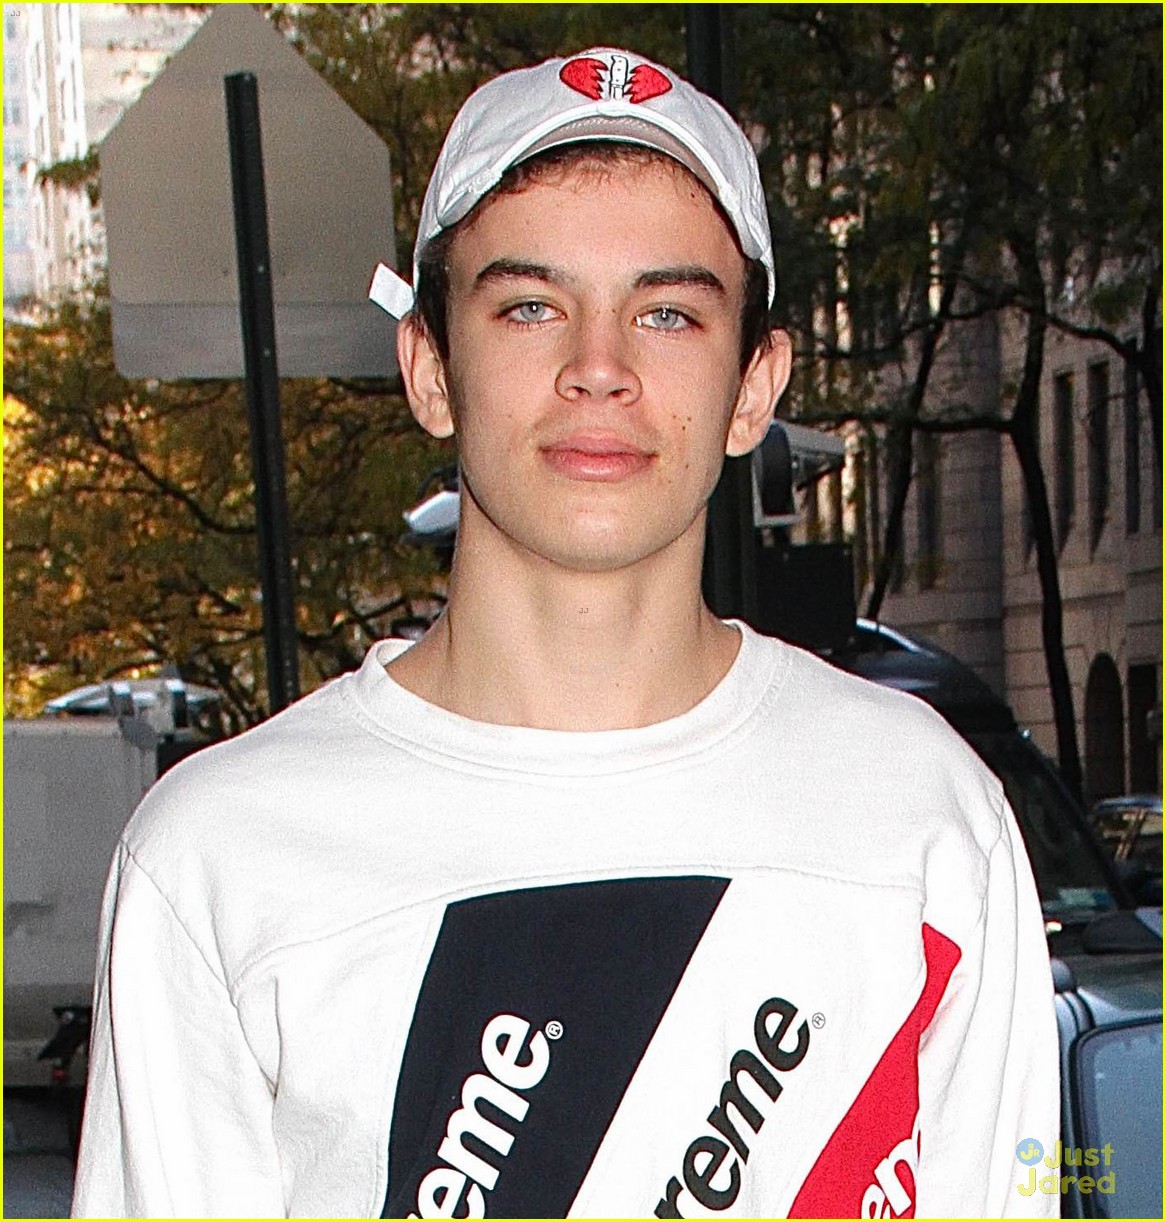 hayes grier good day new york uncle 01